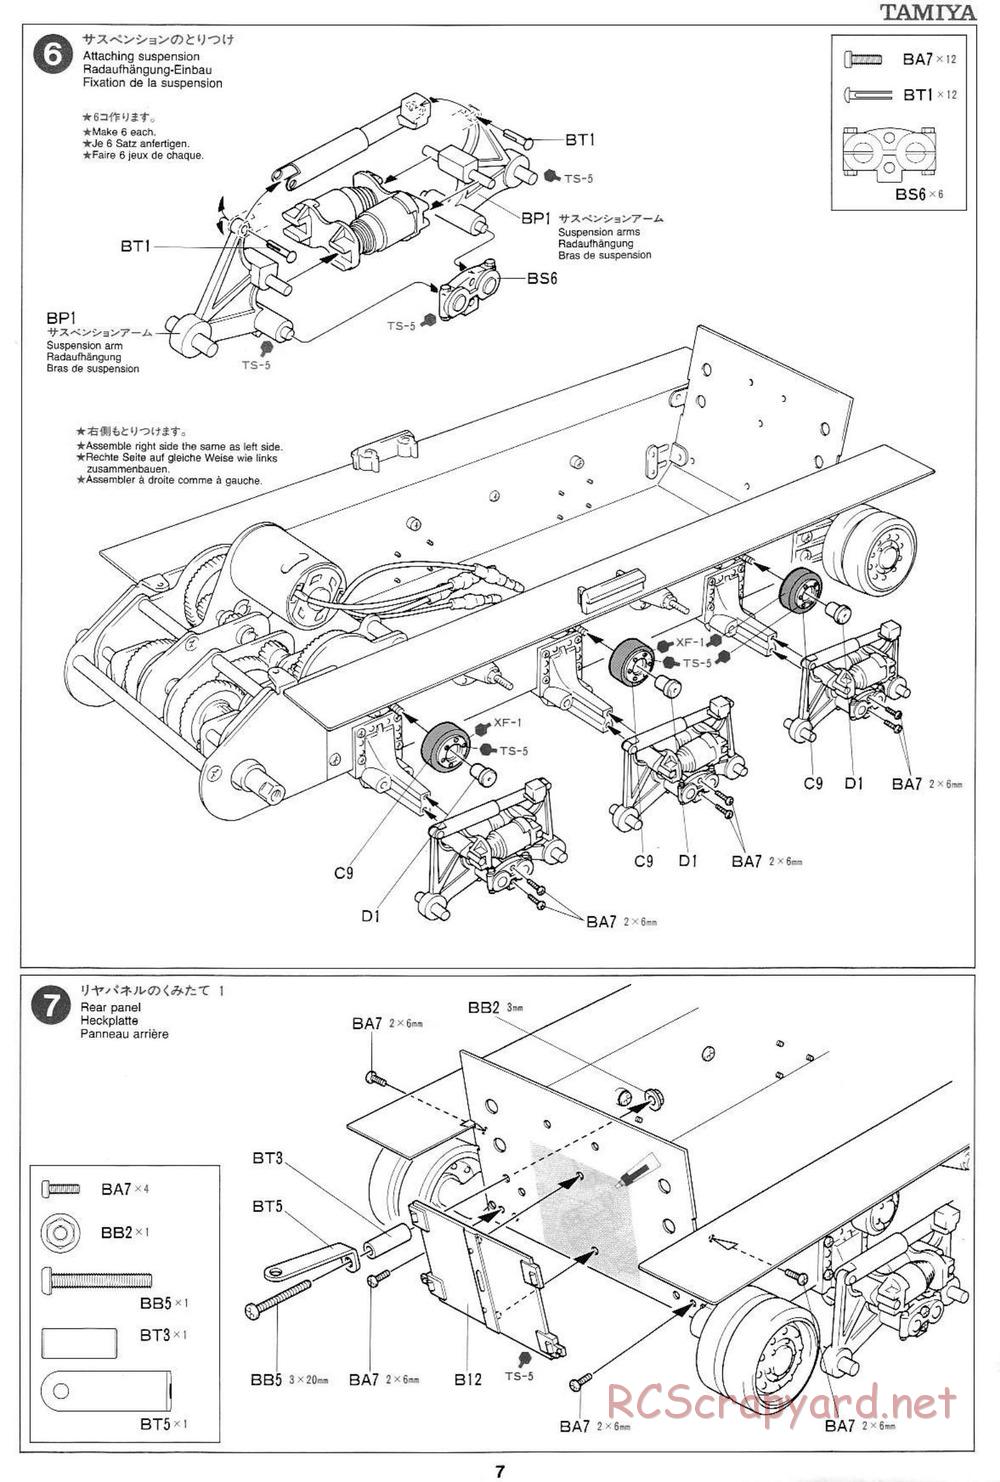 Tamiya - M4 Sherman 105mm Howitzer - 1/16 Scale Chassis - Manual - Page 7